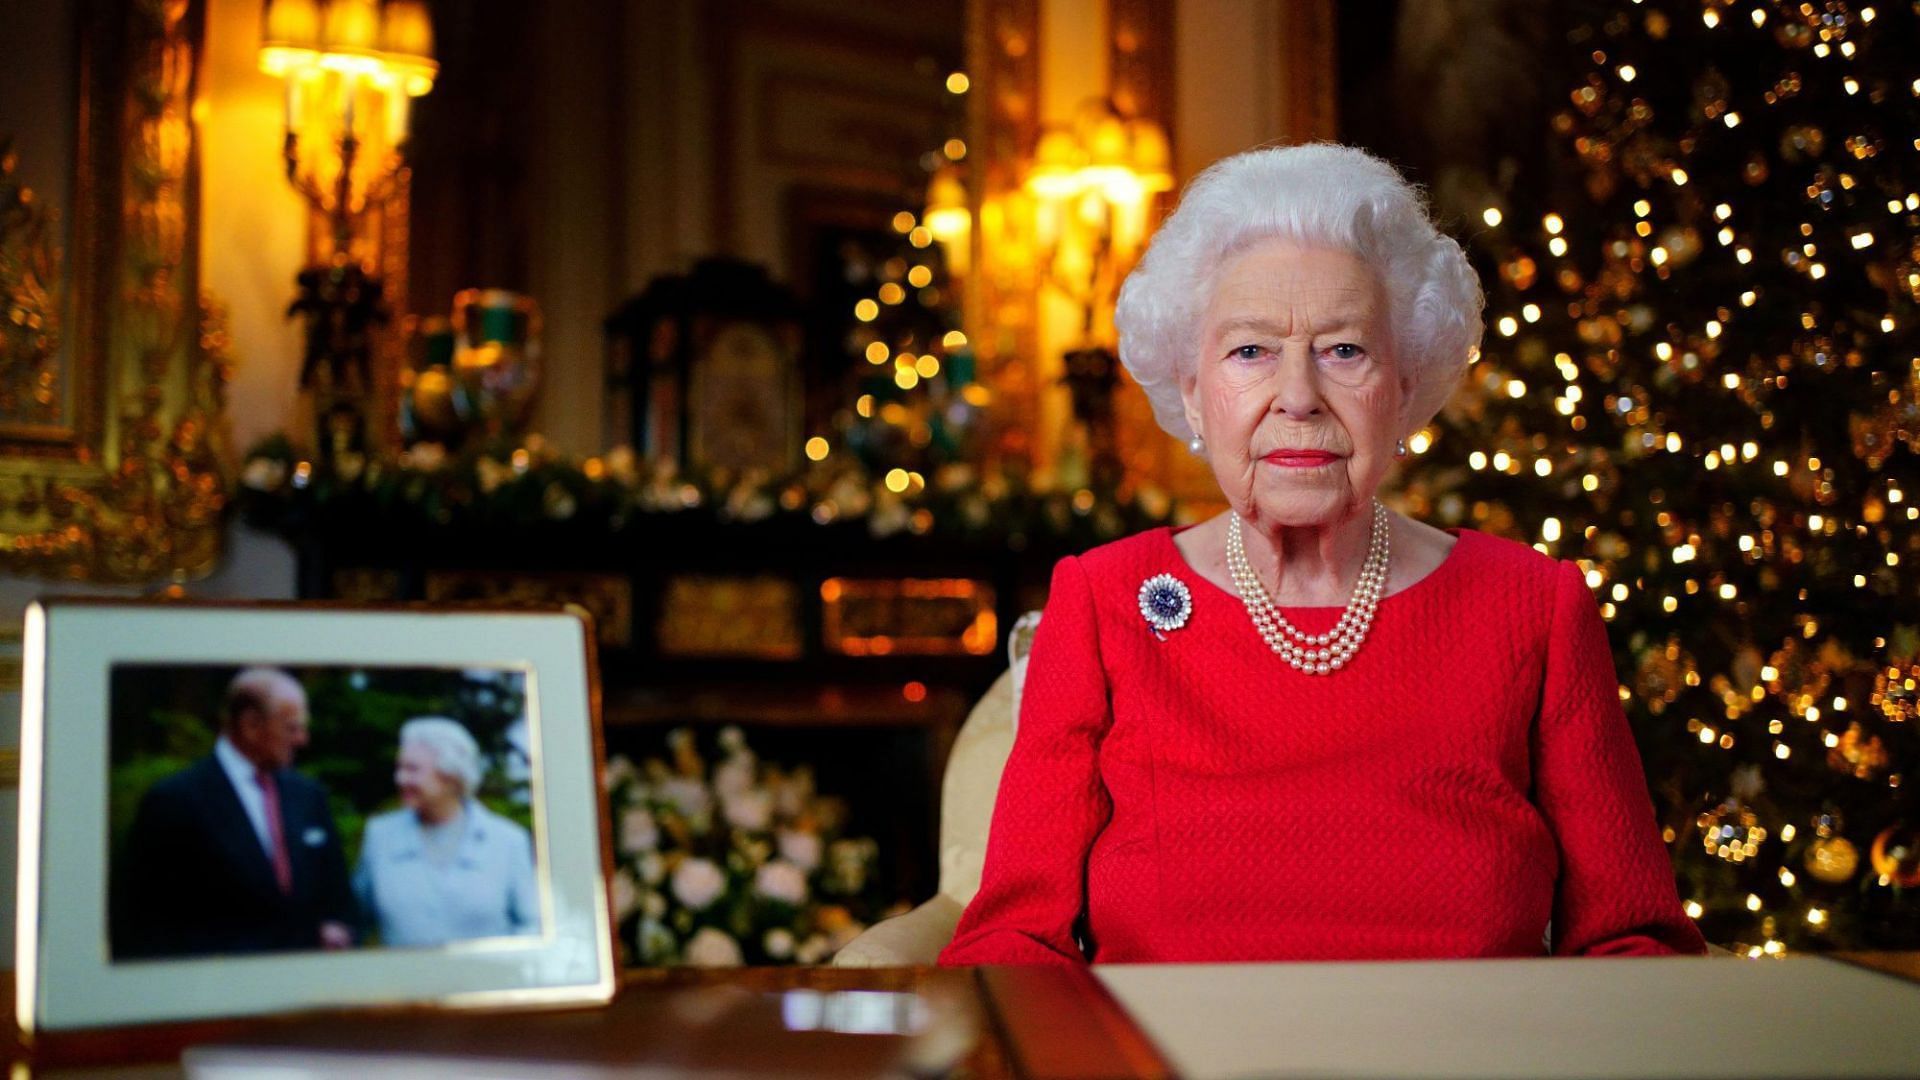 The Queen at the most recent Christmas broadcast in 2021 (Image via People Magazine)